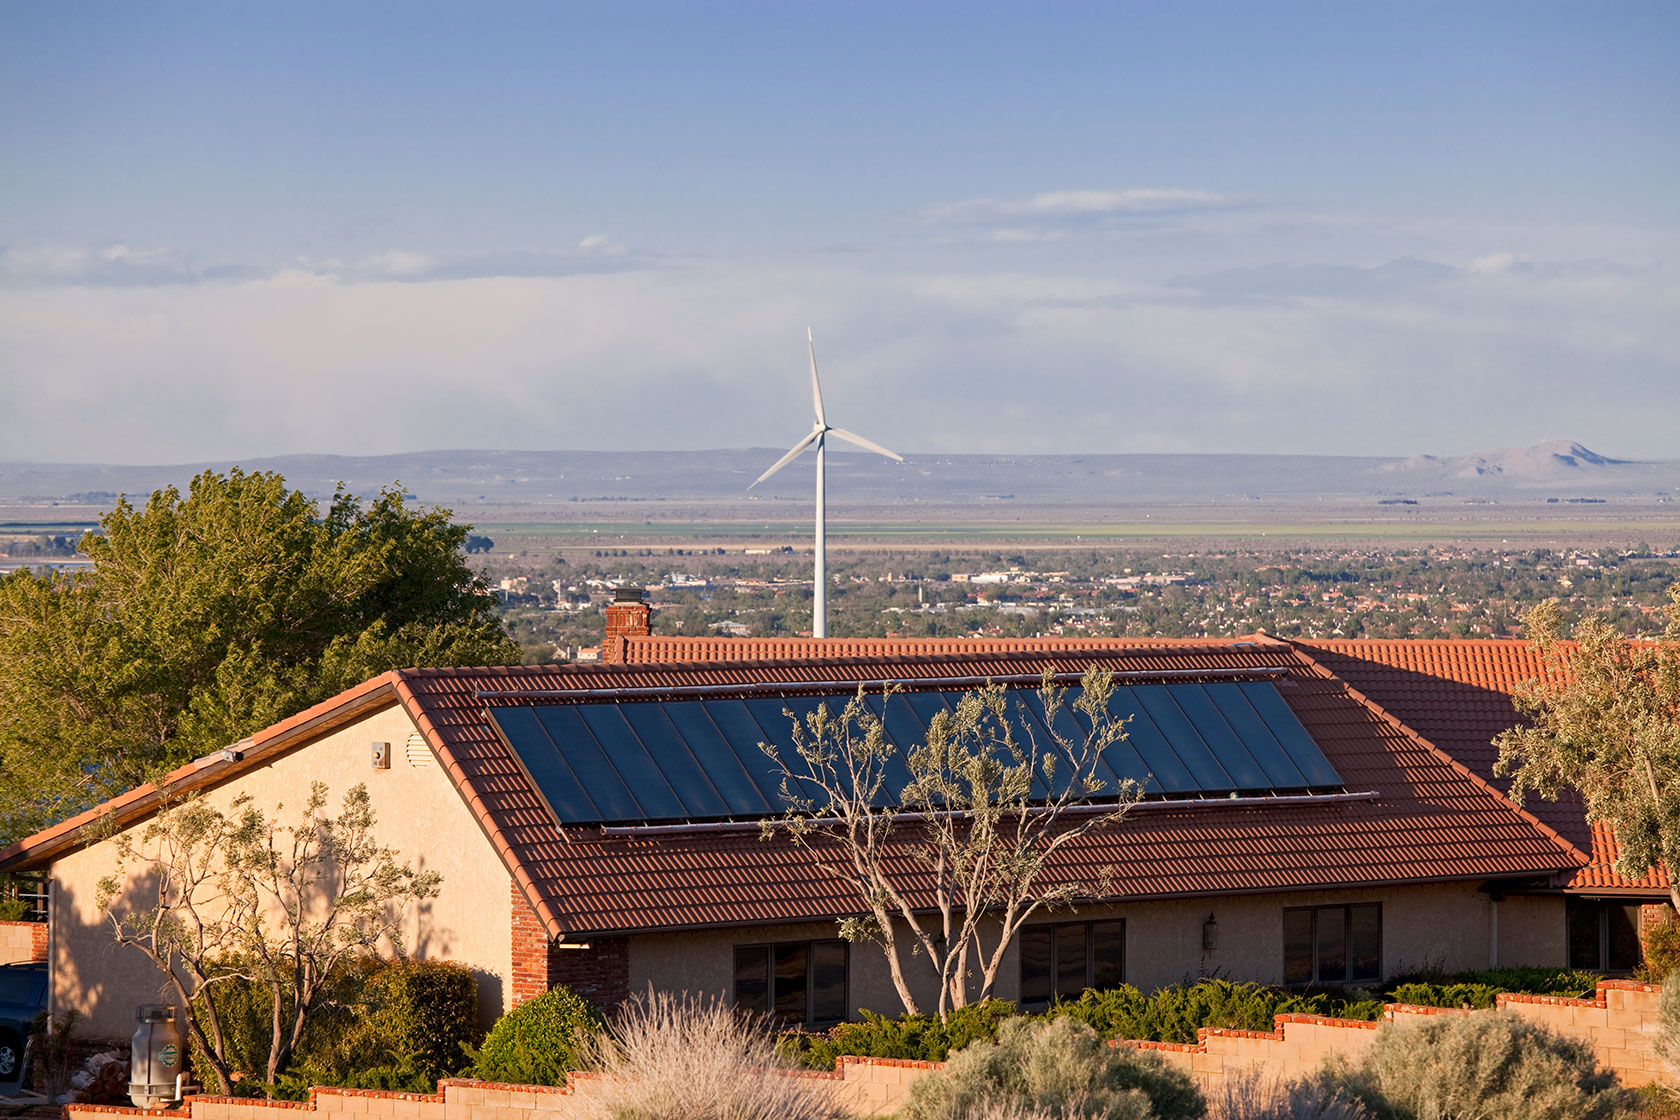 Photo shows a house with solar panels on its roof and a wind turbine in the background.